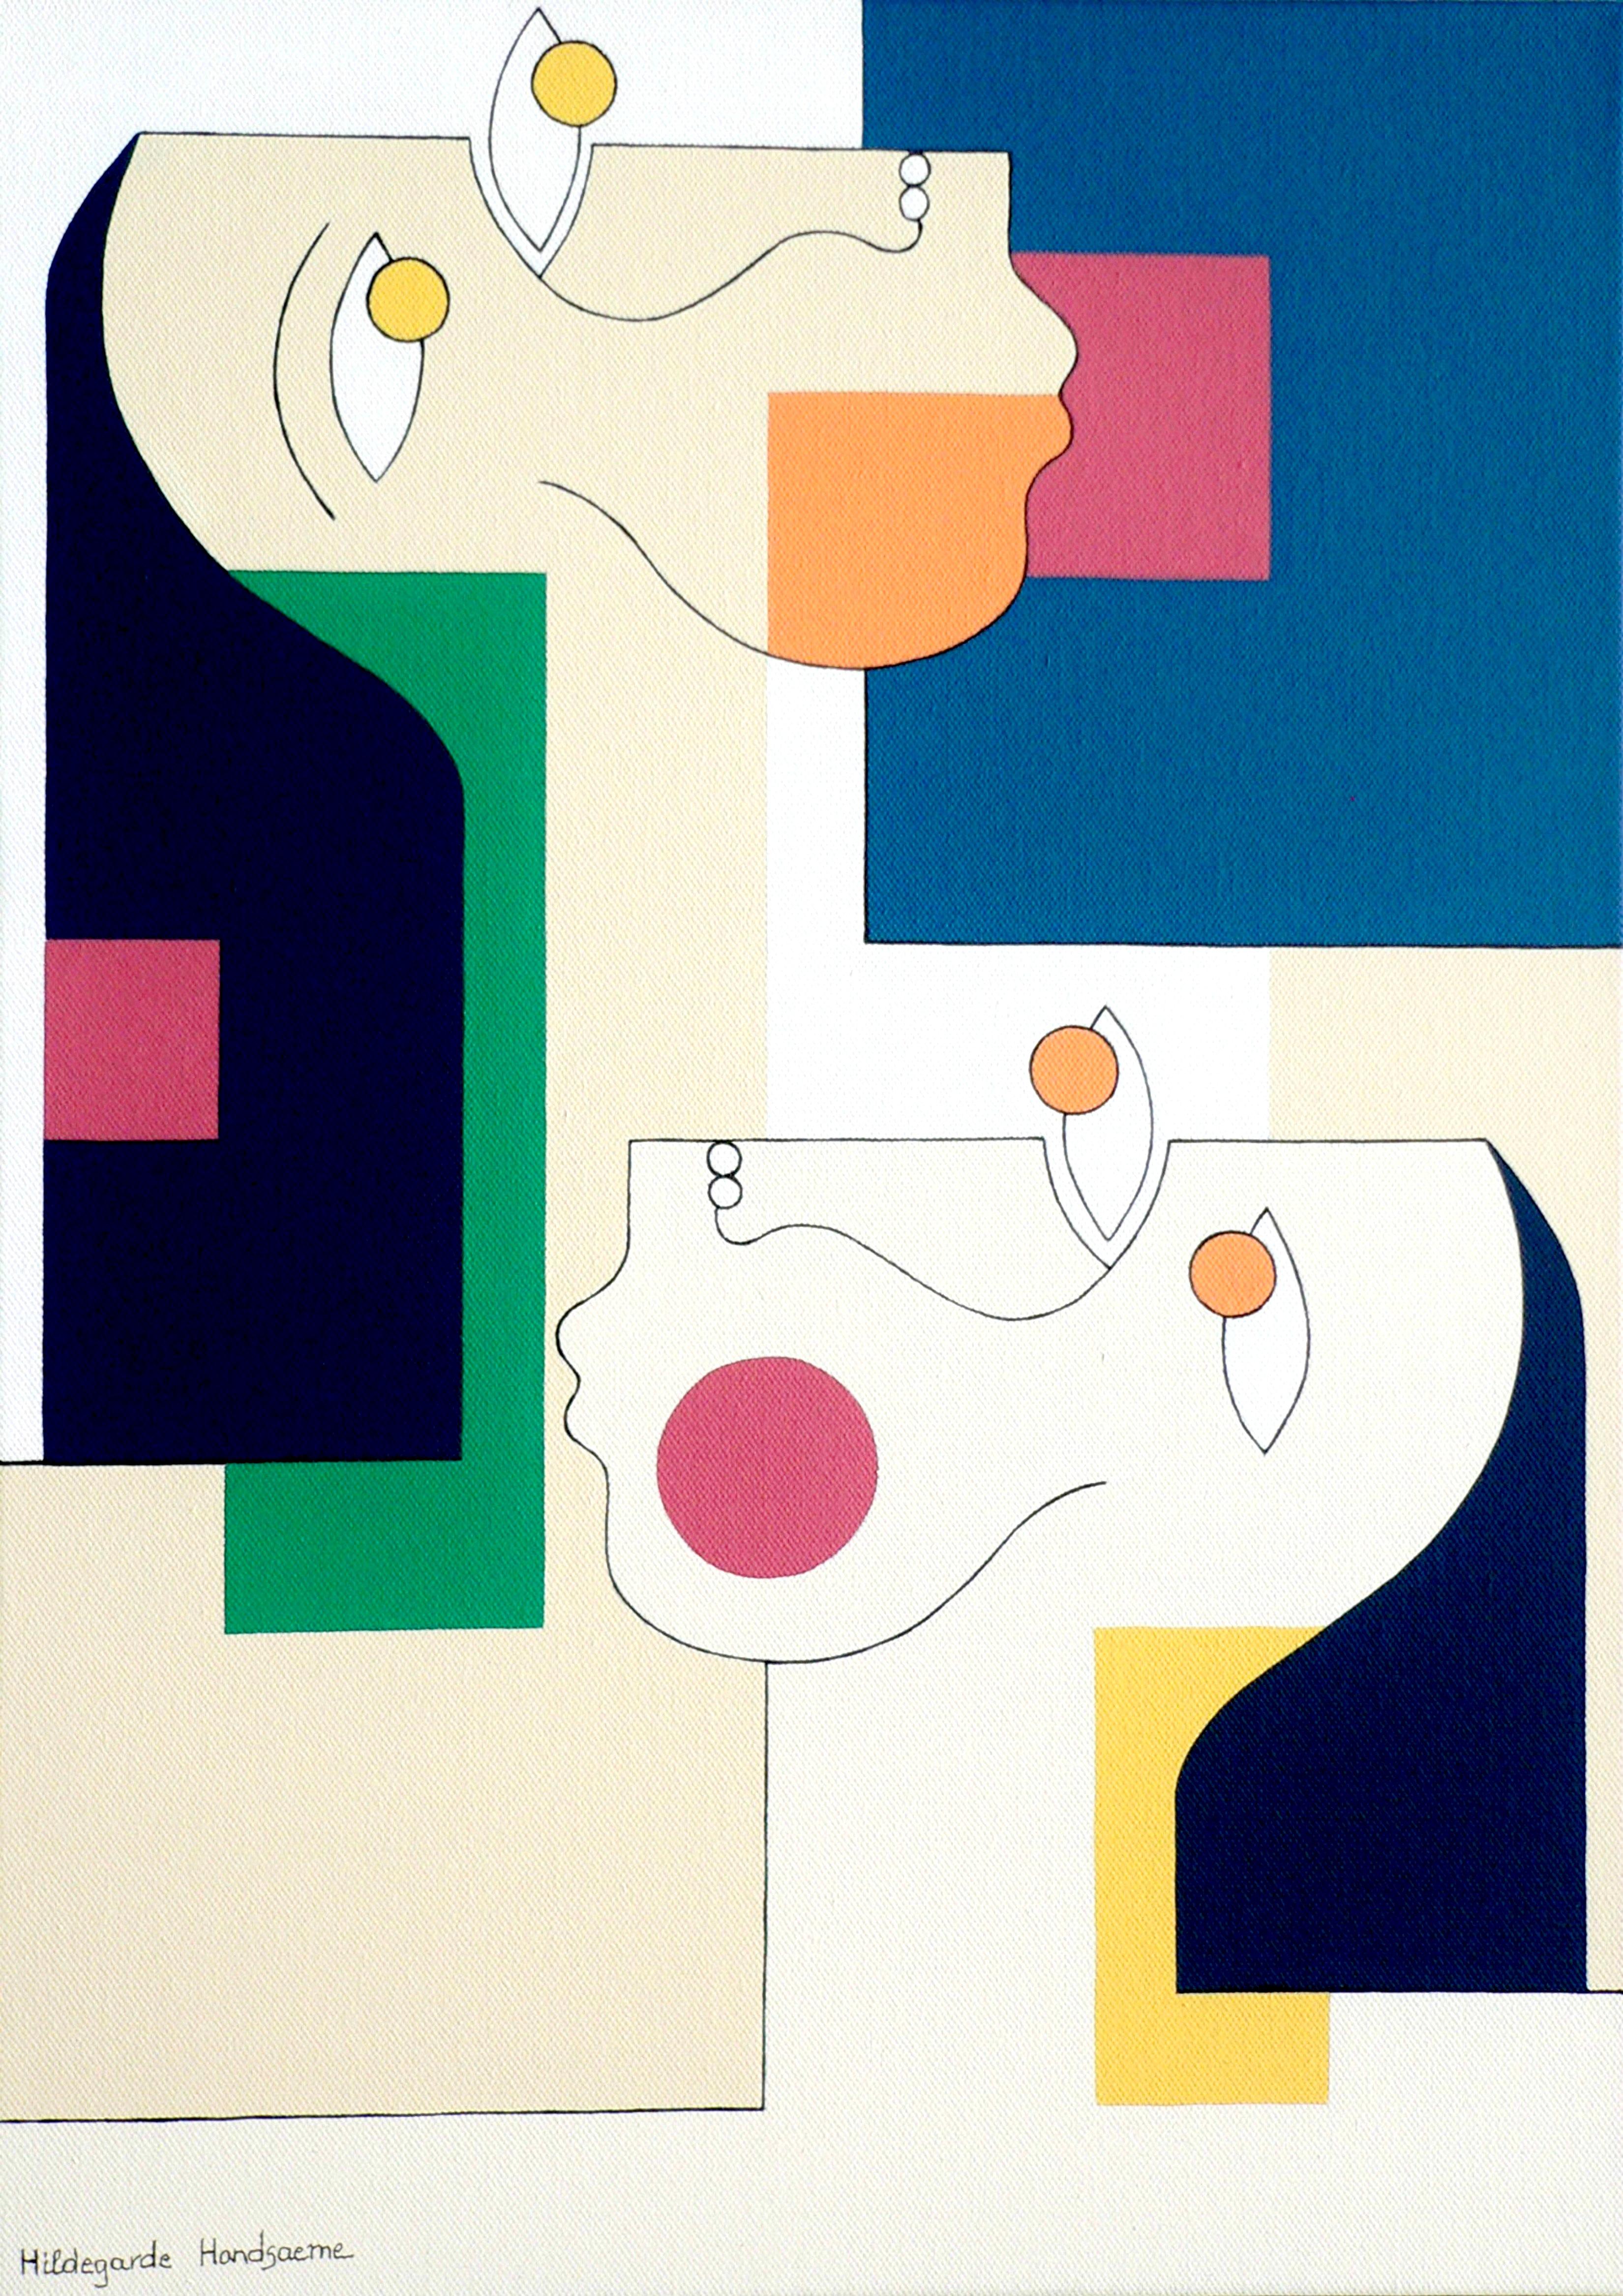 'Twins' by Hildegarde Handsaeme is a great abstract painting of an androgynous couple: it's hard to identify the sex of the figures but this is insignificant in the artwork. Both faces are gazing one direction and seem to reflect each other